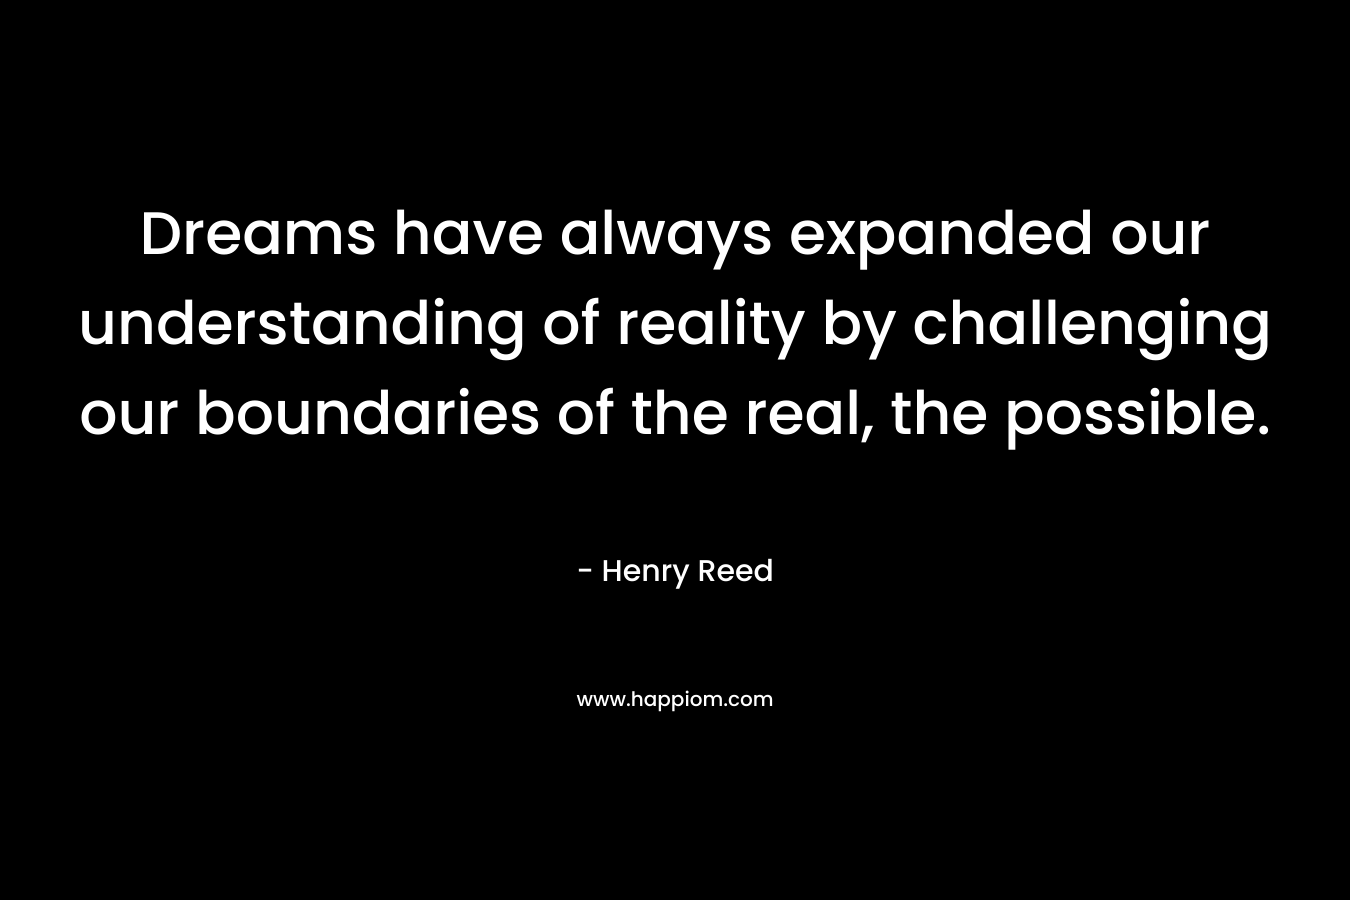 Dreams have always expanded our understanding of reality by challenging our boundaries of the real, the possible.